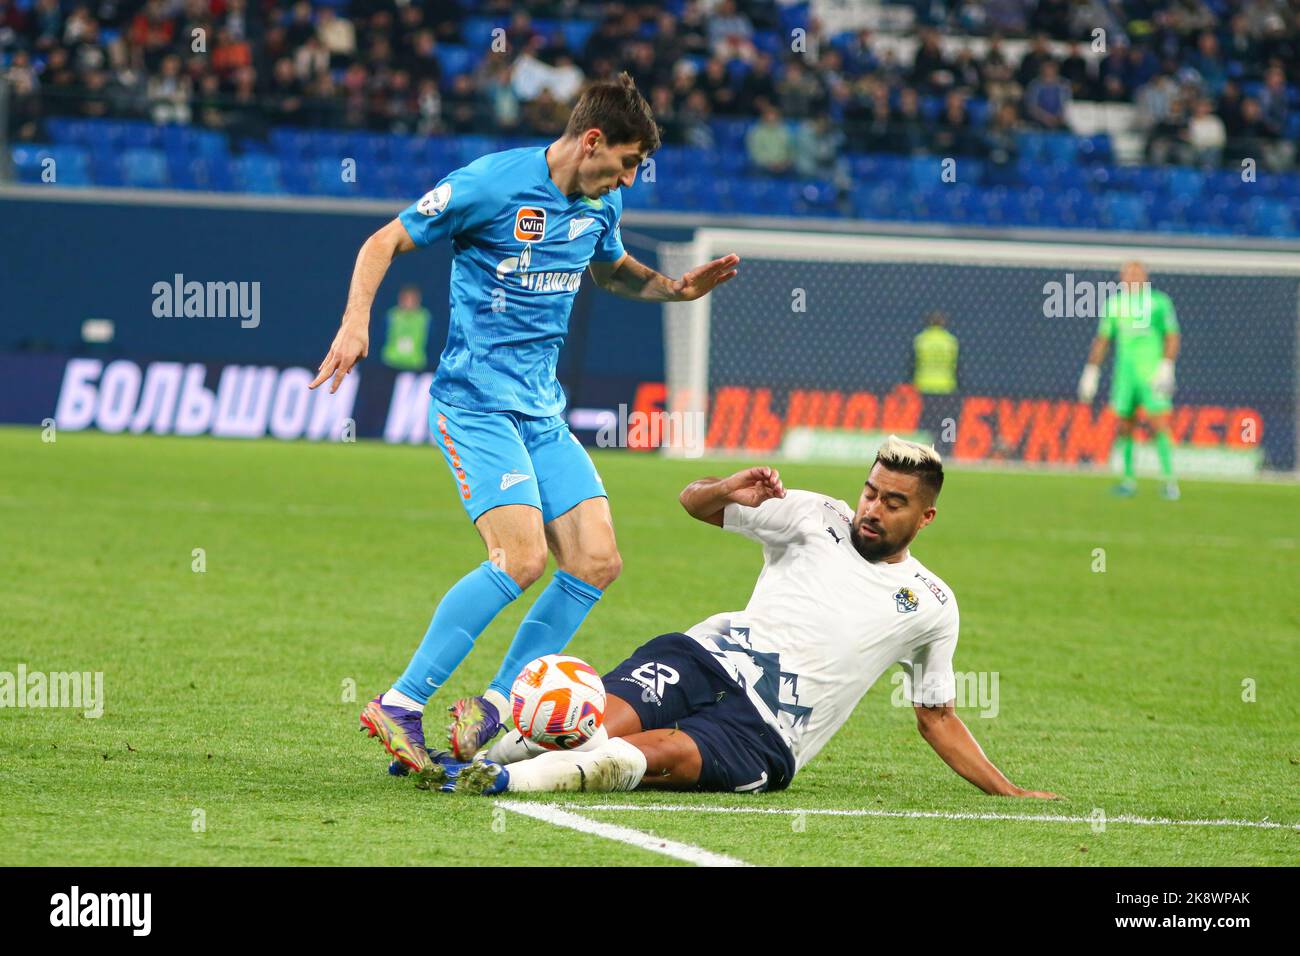 Saint Petersburg, Russia. 24th Oct, 2022. Zelimkhan Bakaev (L) of Zenit and Christian Noboa (R) of Sochi seen in action during the Russian Premier League football match between Zenit Saint Petersburg and Sochi at Gazprom Arena. Final score; Zenit 7:0 Sochi. Credit: SOPA Images Limited/Alamy Live News Stock Photo